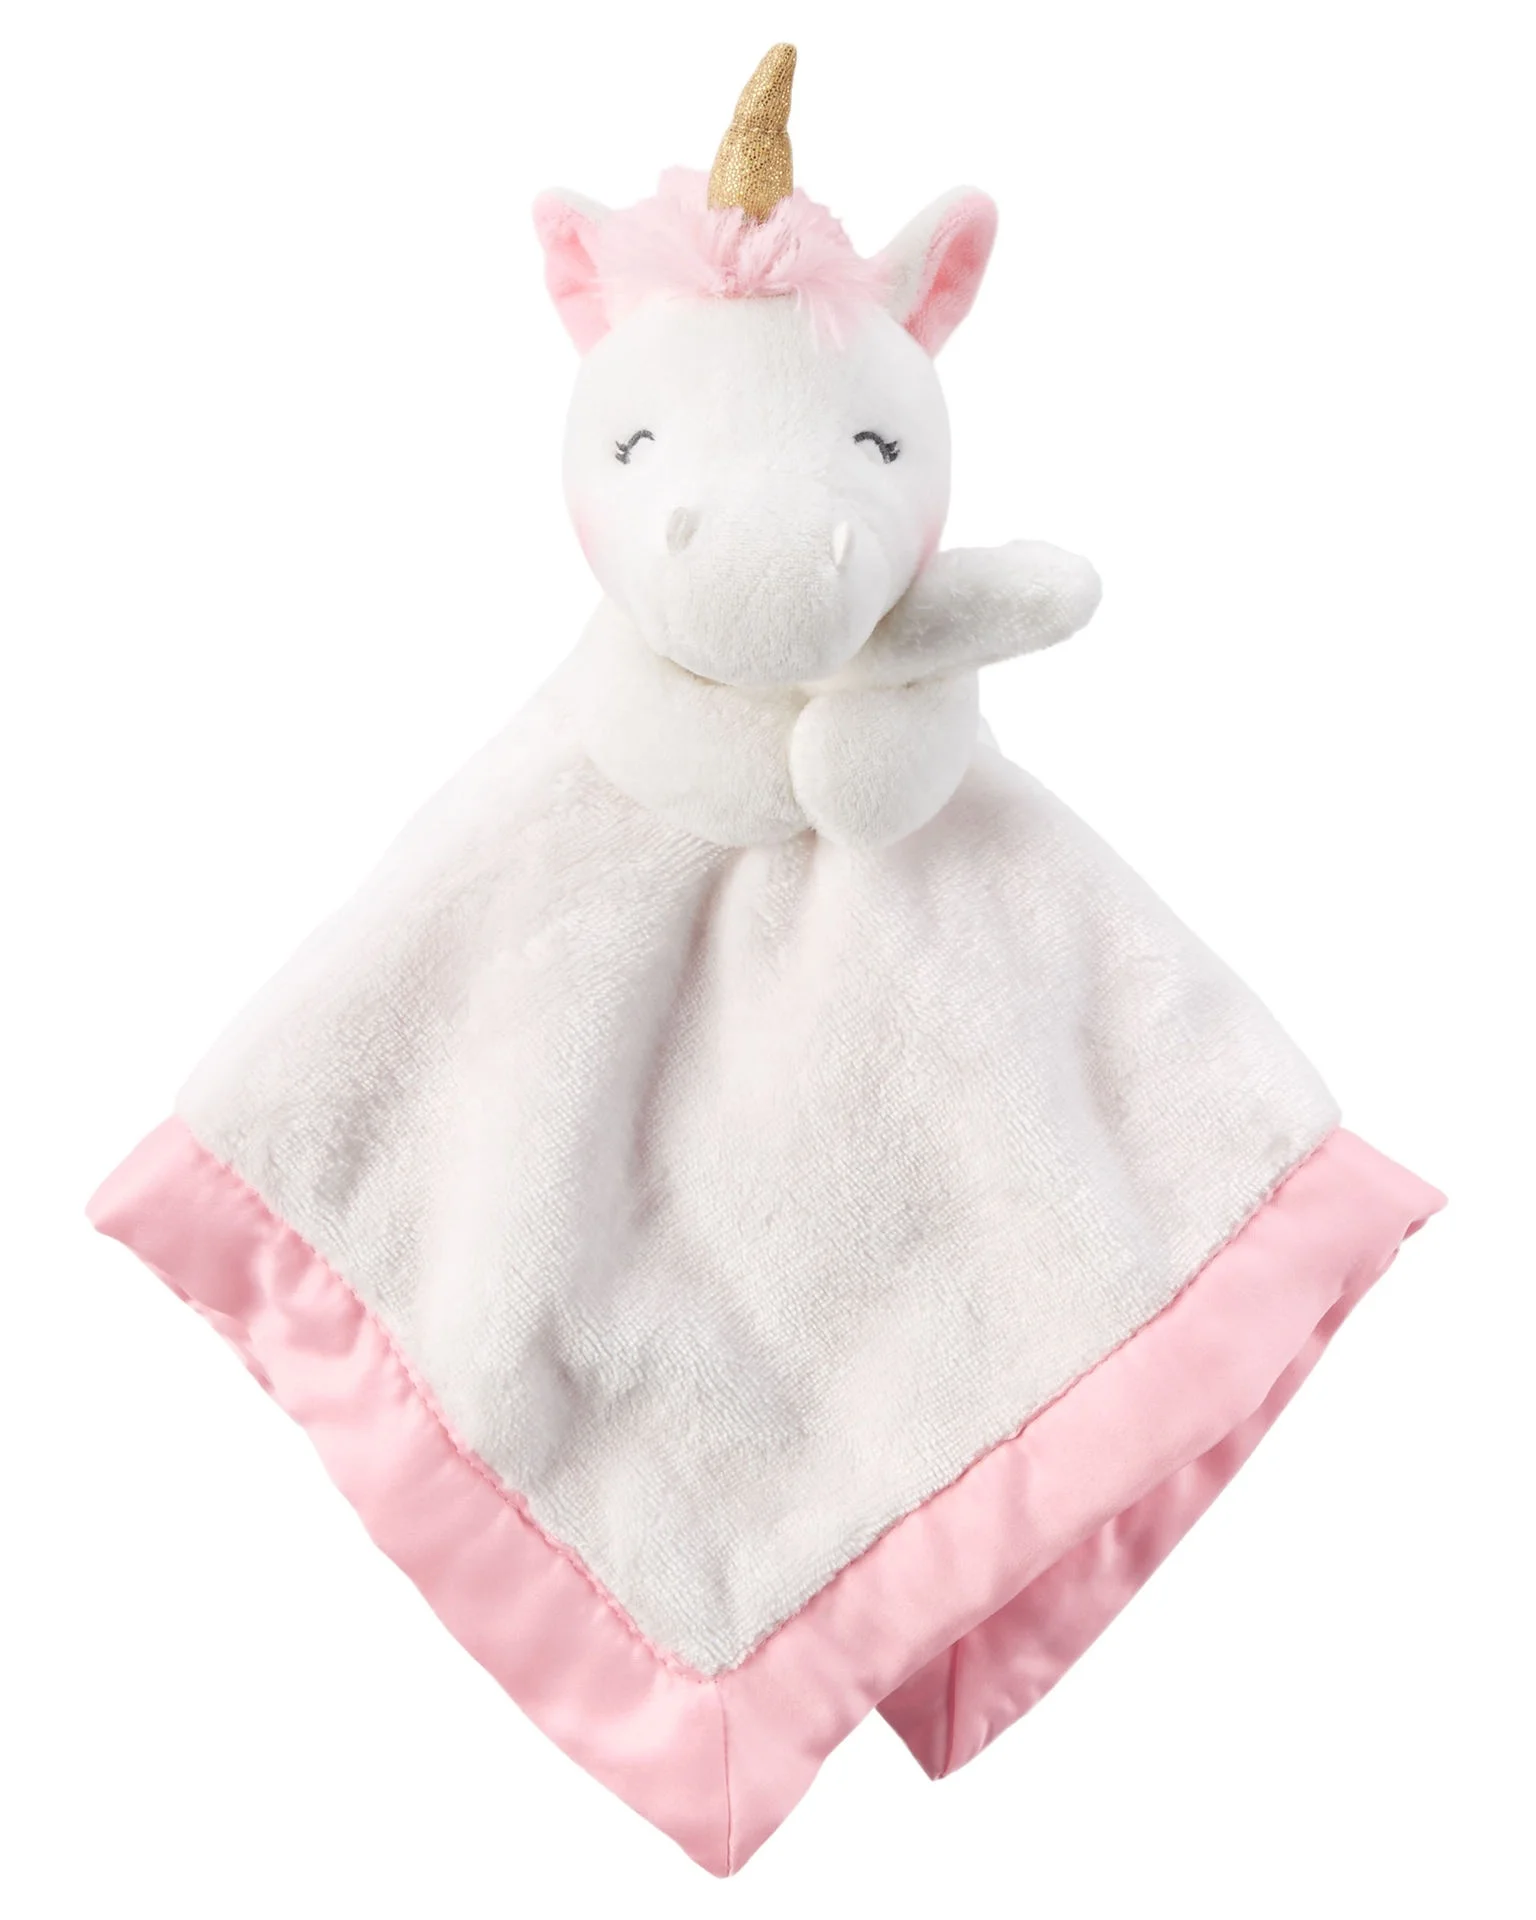 baby nat soft plush toy baby security doudou blanket baby favors comforter towel